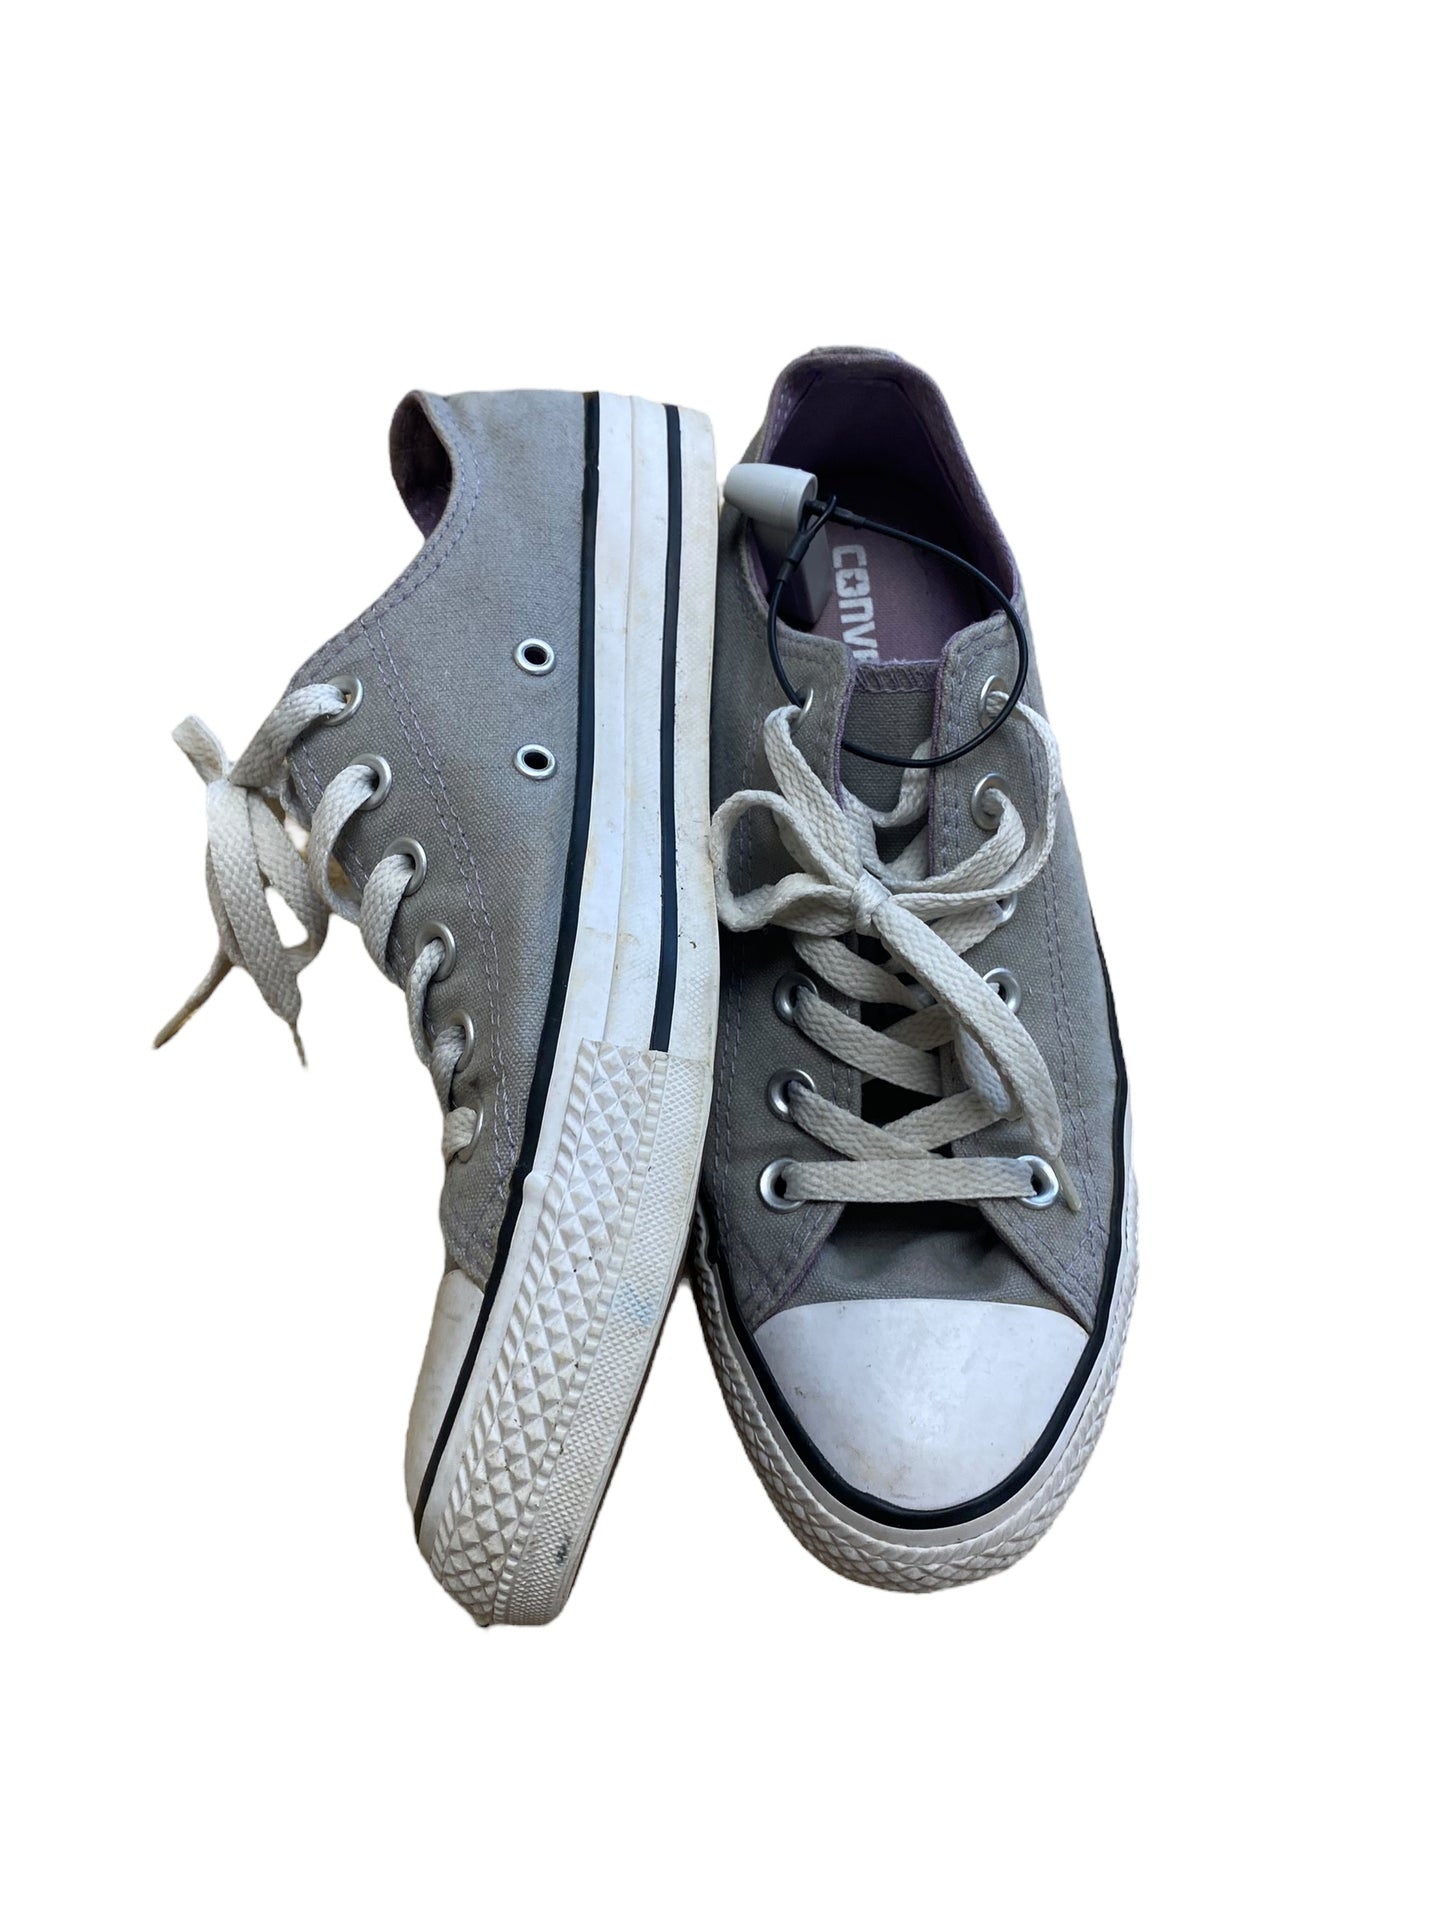 Shoes Flats By Converse  Size: 8